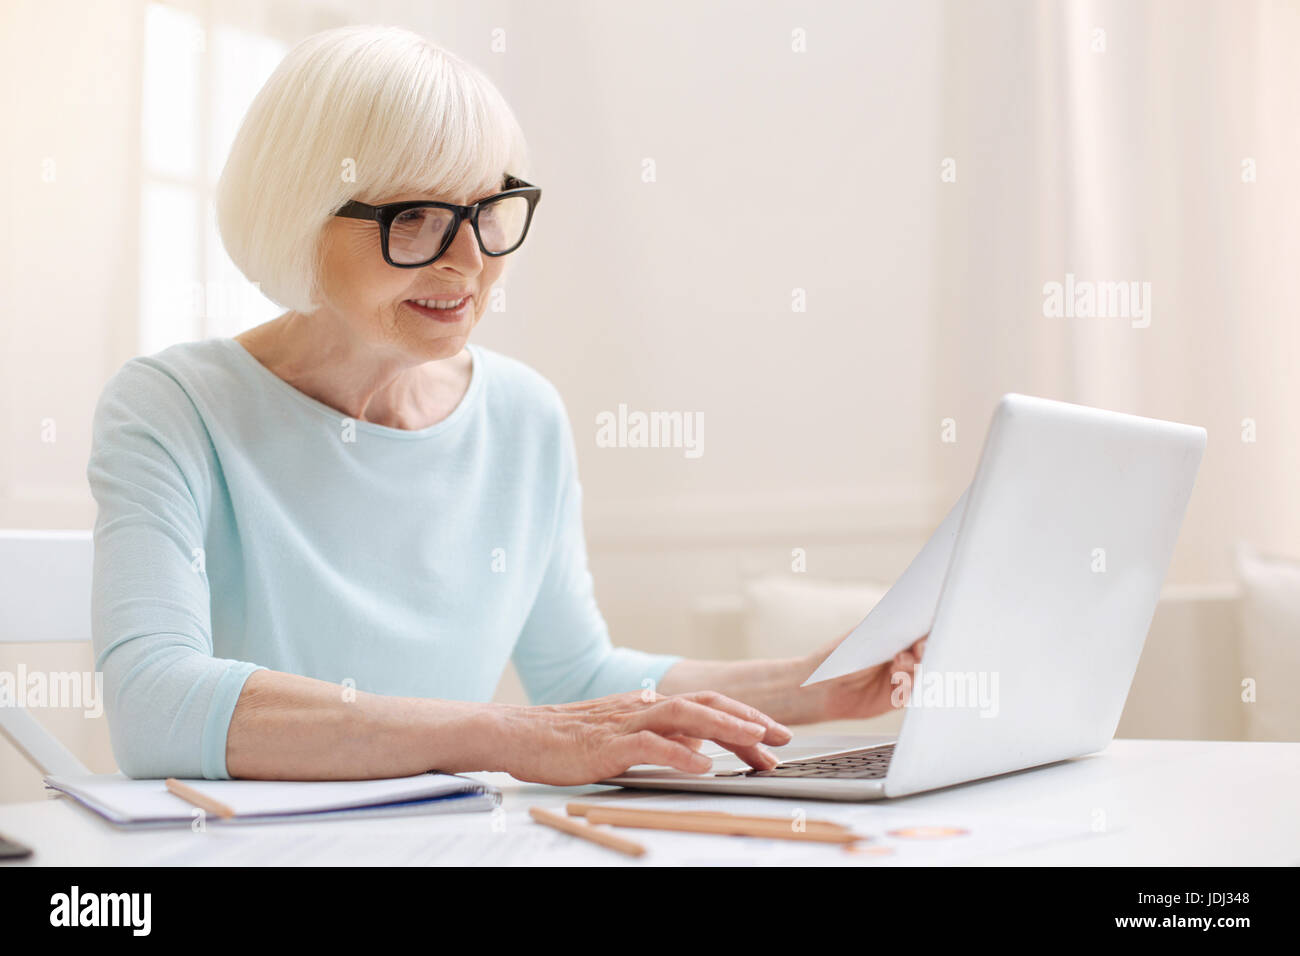 Charismatic intelligent lady writing an email Stock Photo